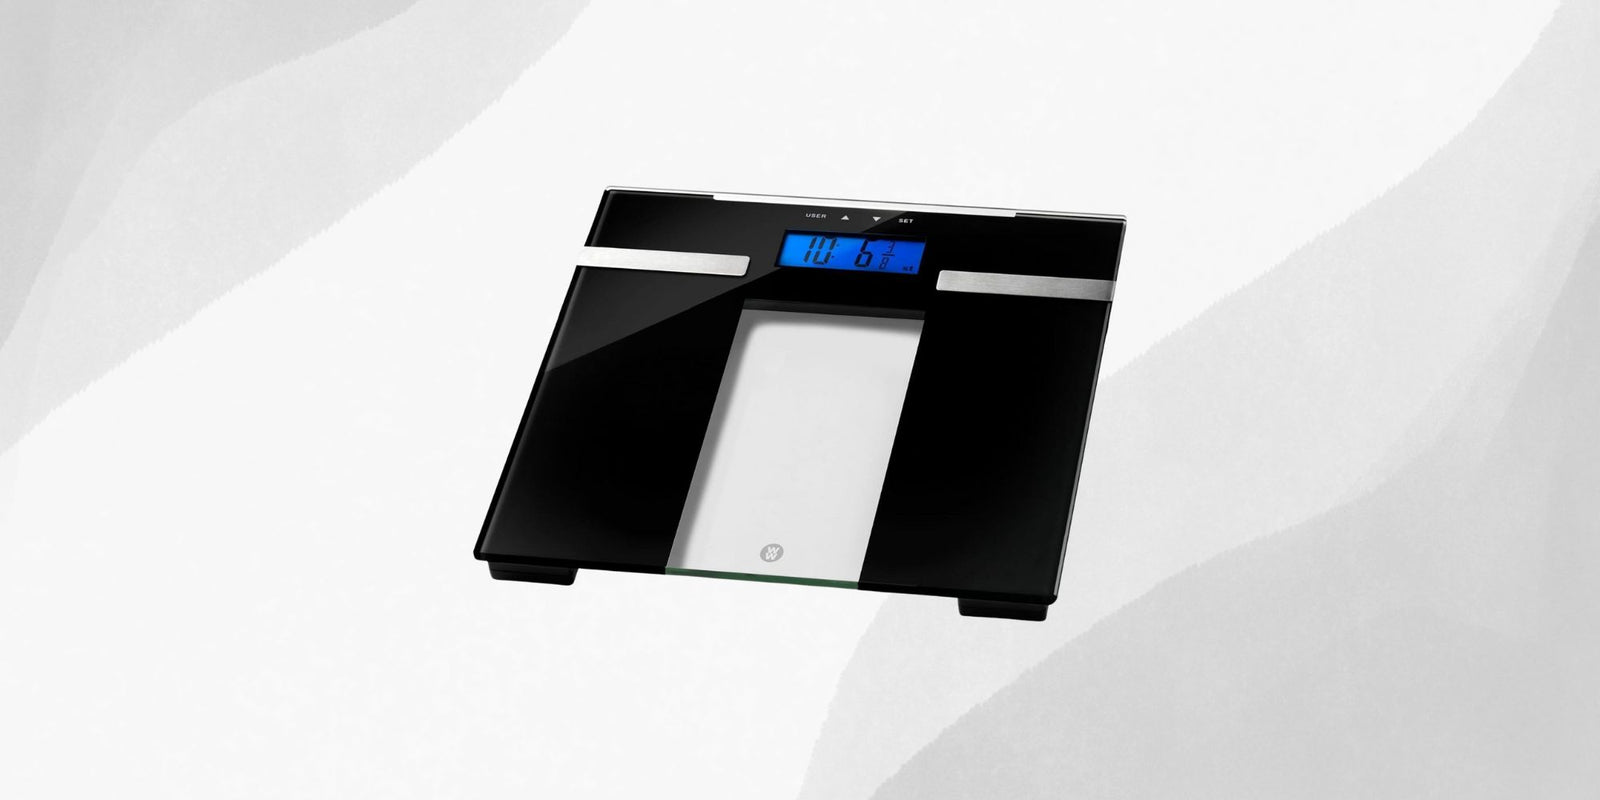 What is a Body Analysis Scale?